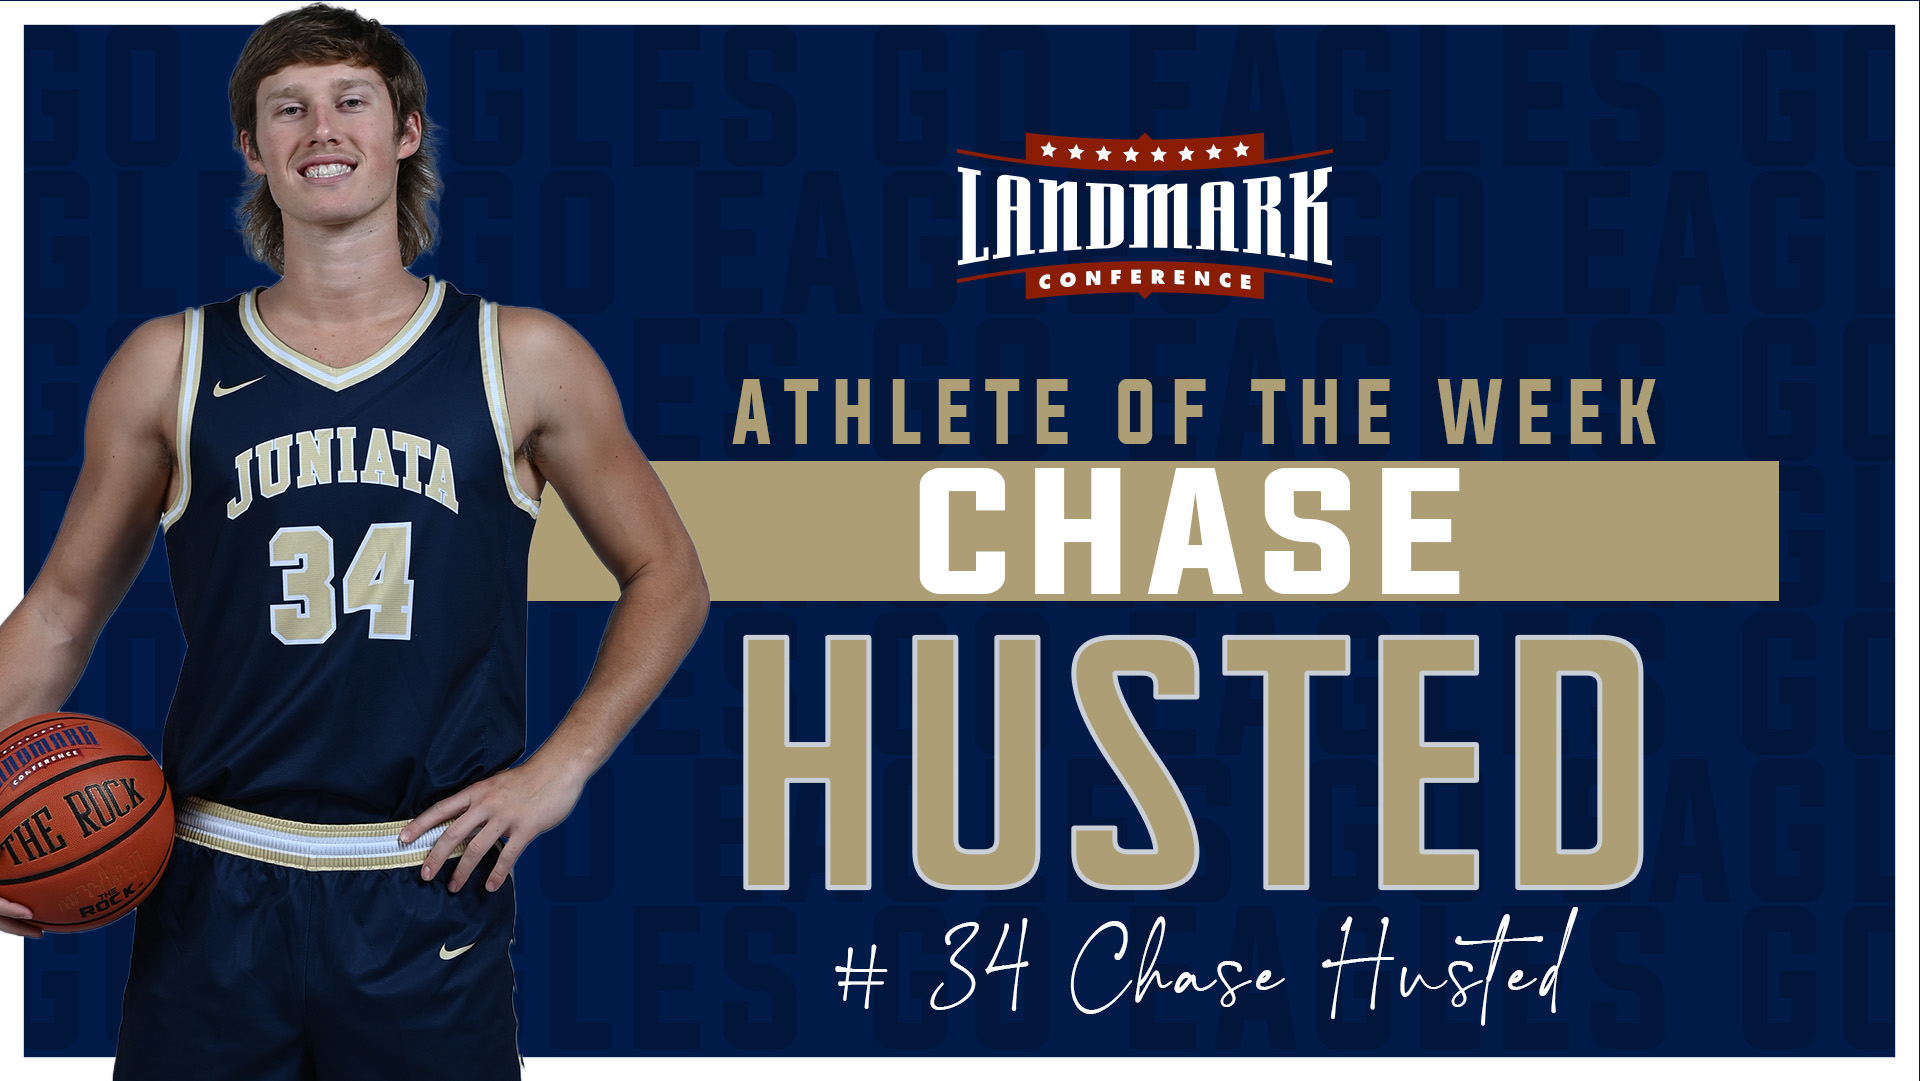 Husted Named Landmark Athlete of the Week for Second Time this Season